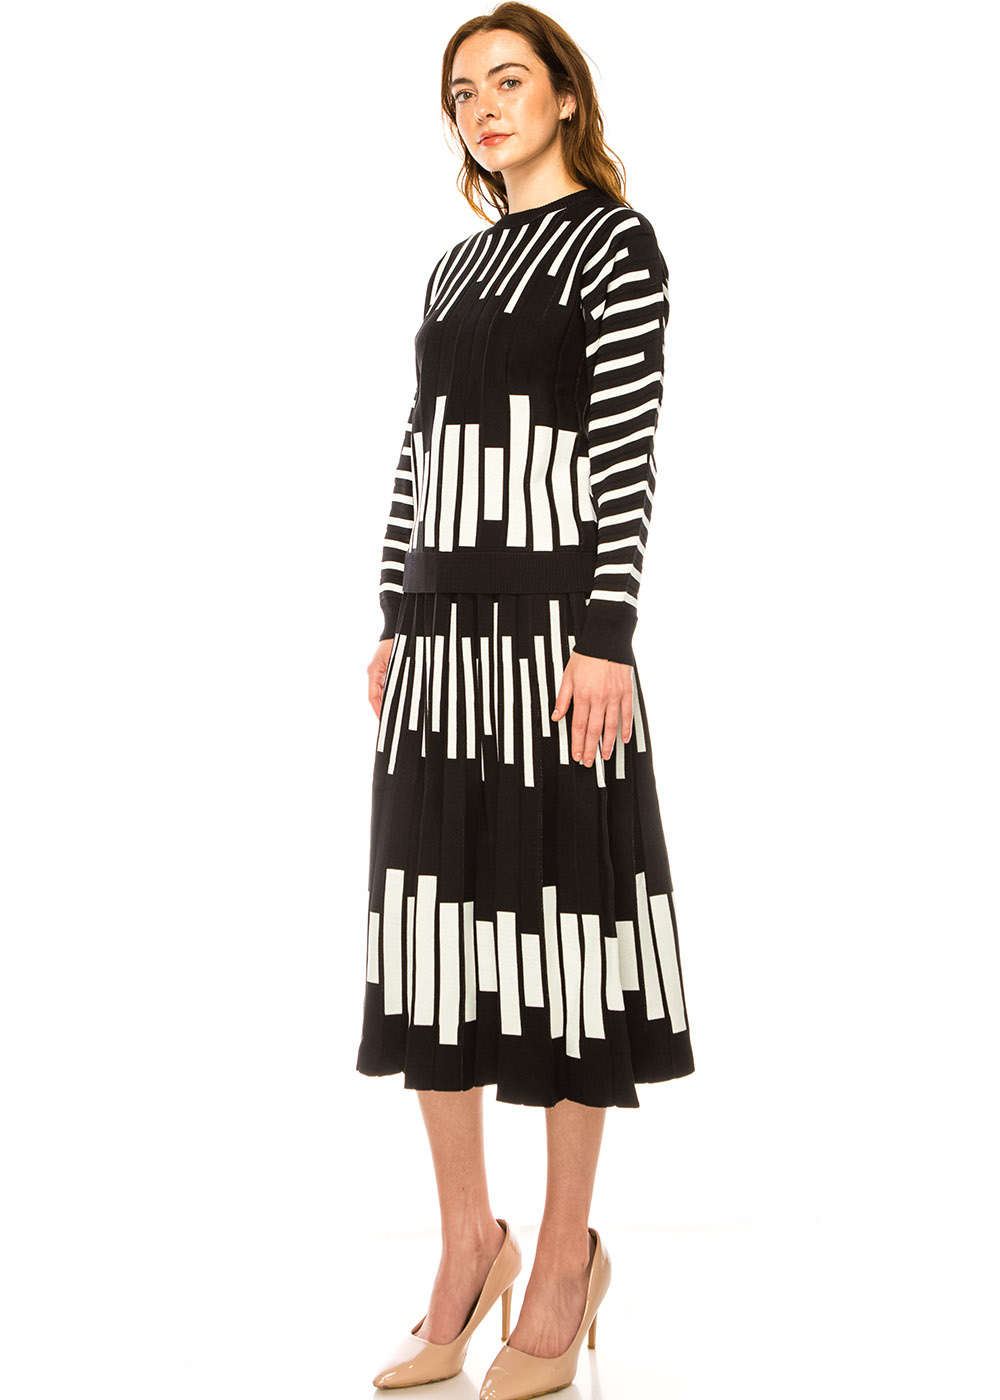 Knit Perfection in Black and White Stripes